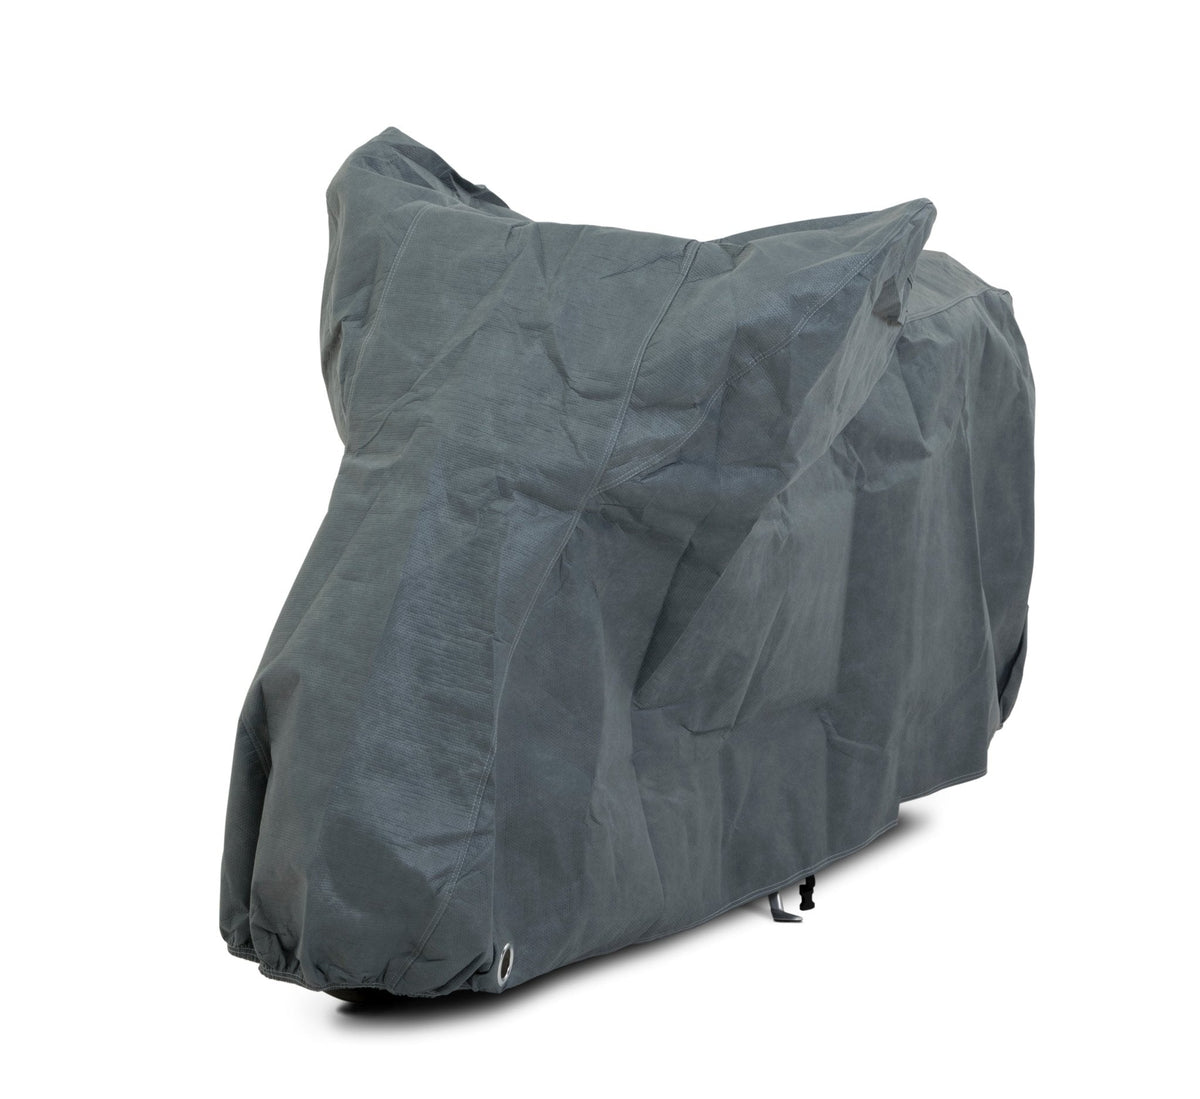 Stormforce best outdoor motorcycle covers for MOTO GUZZI - Storm Motorcycle Covers